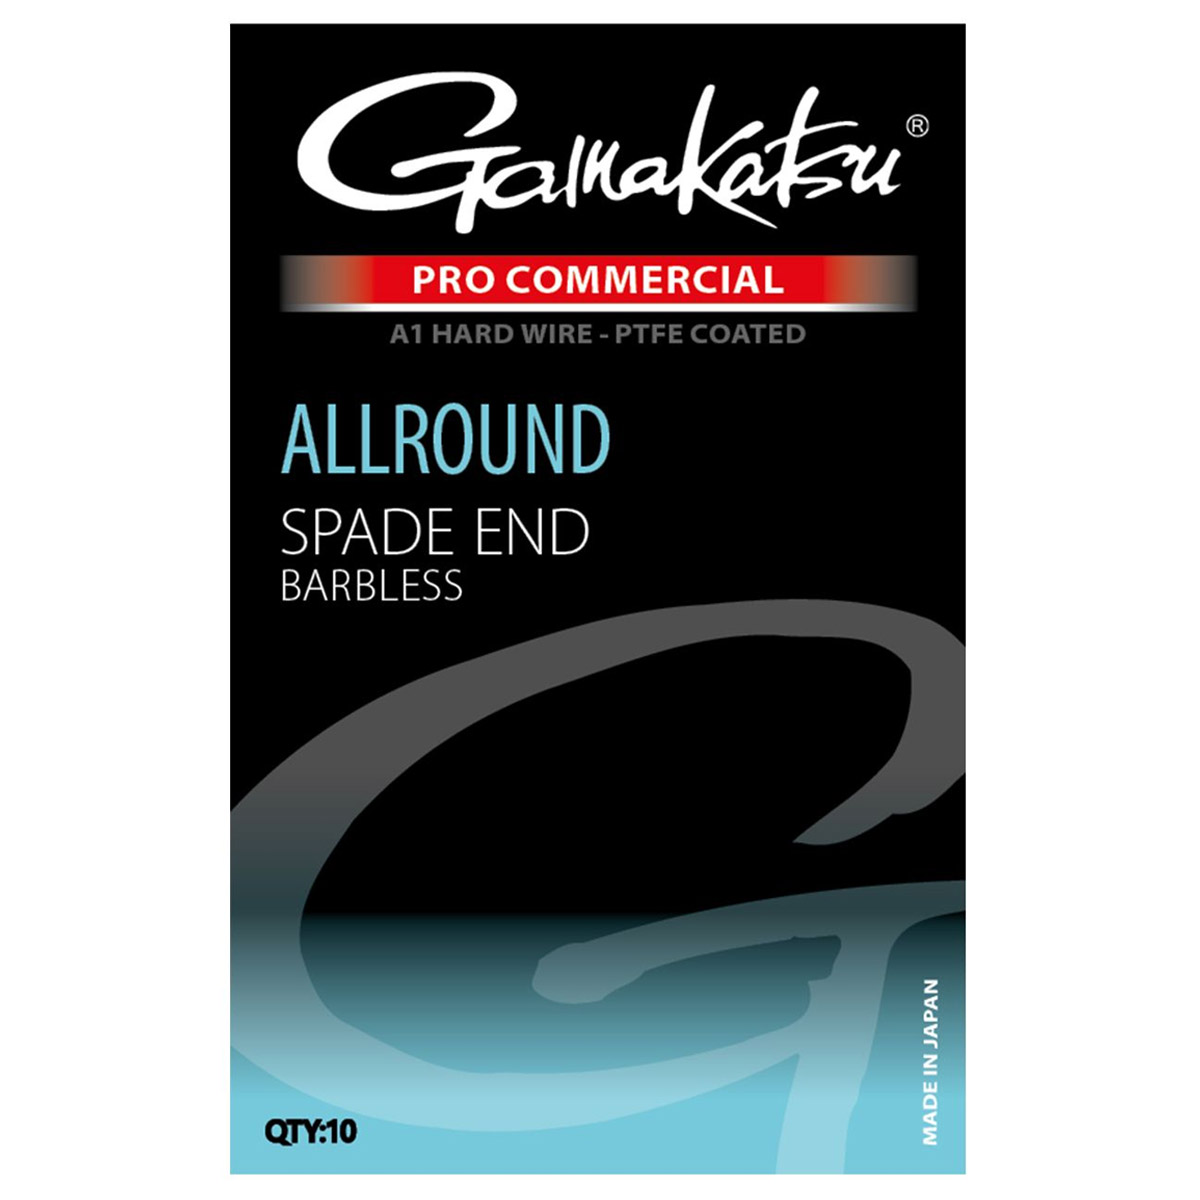 Gamakatsu Pro Commercial Allround A1 Spade End Barbless